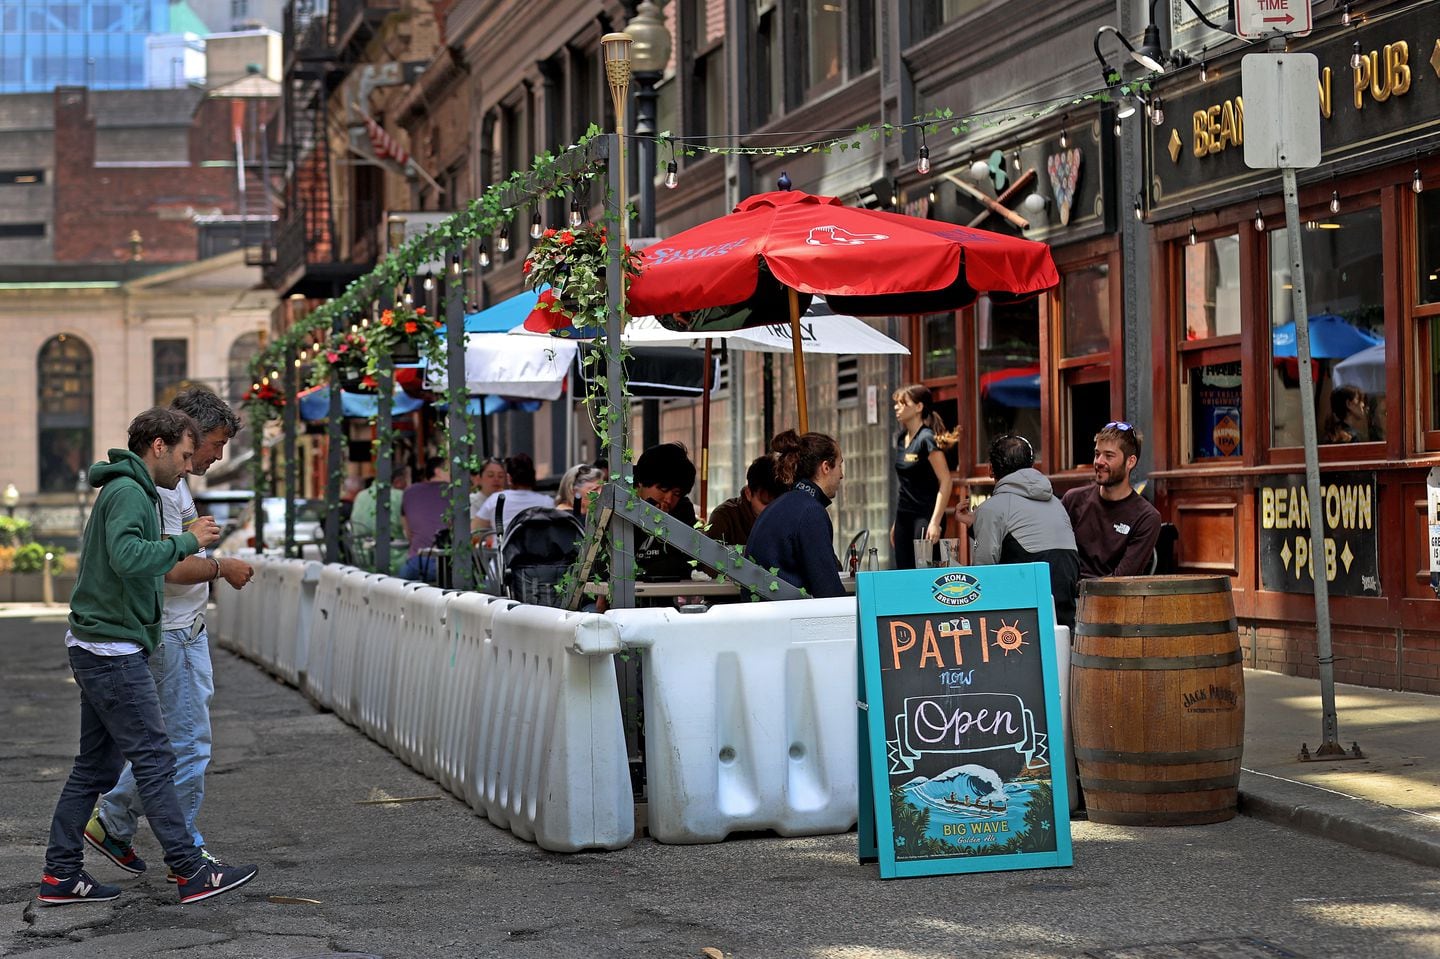 The outdoor patio at Beantown Pub on Tremont Street this season.